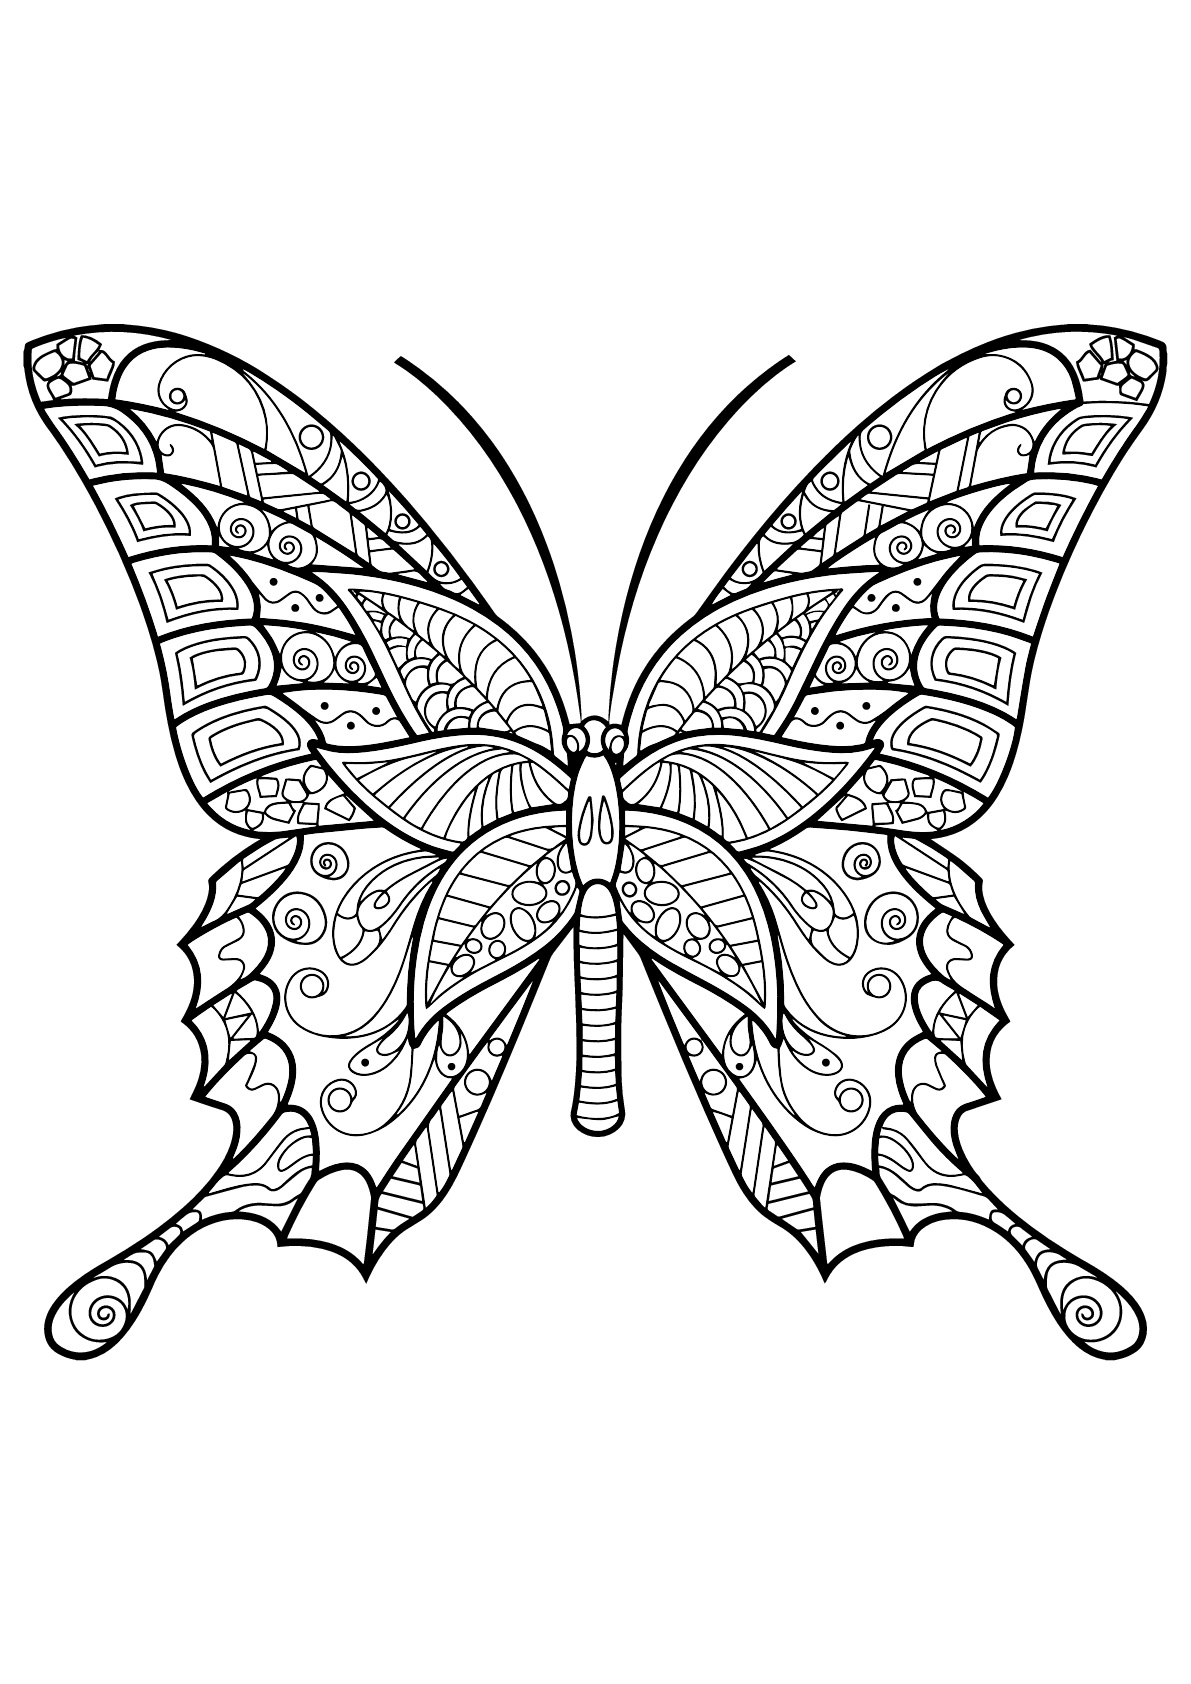 Butterfly beautiful patterns - 6 - Butterflies & insects Adult Coloring ...